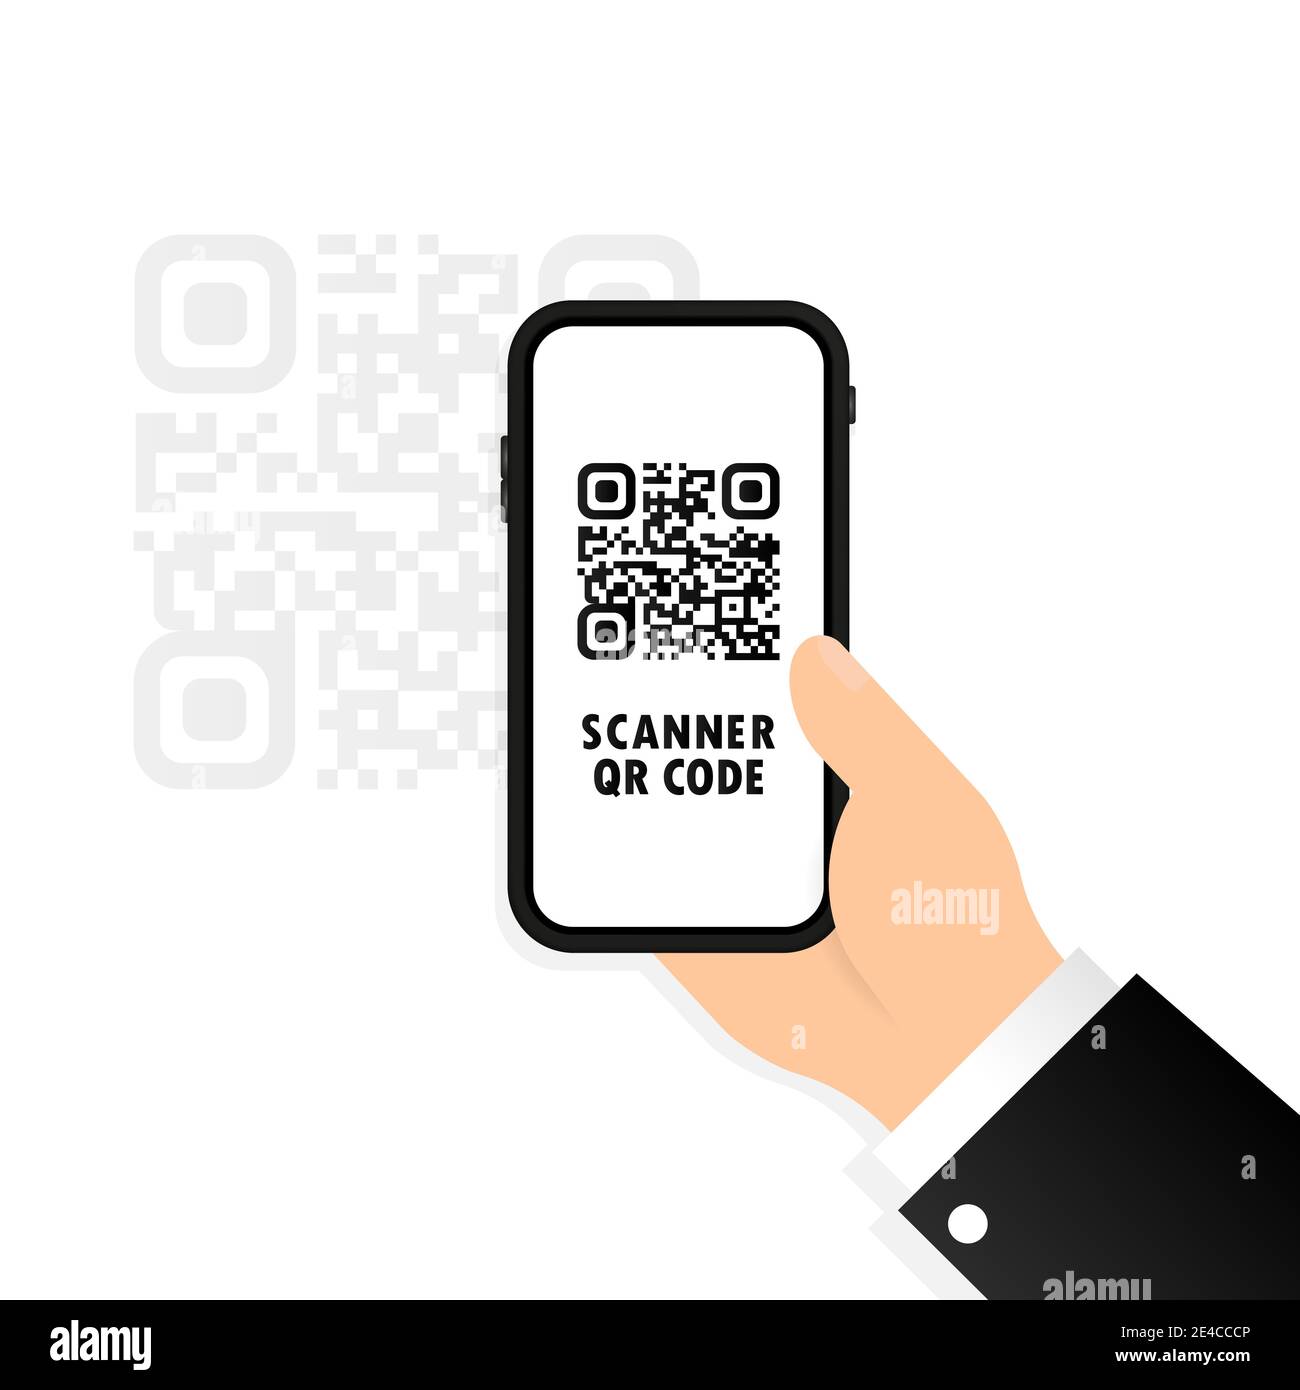 QR scanner icon. Mobile phone in hand scans QR code. Scan the qrcode using a mobile phone. Capture the qr code on your mobile phone. For digital payme Stock Vector